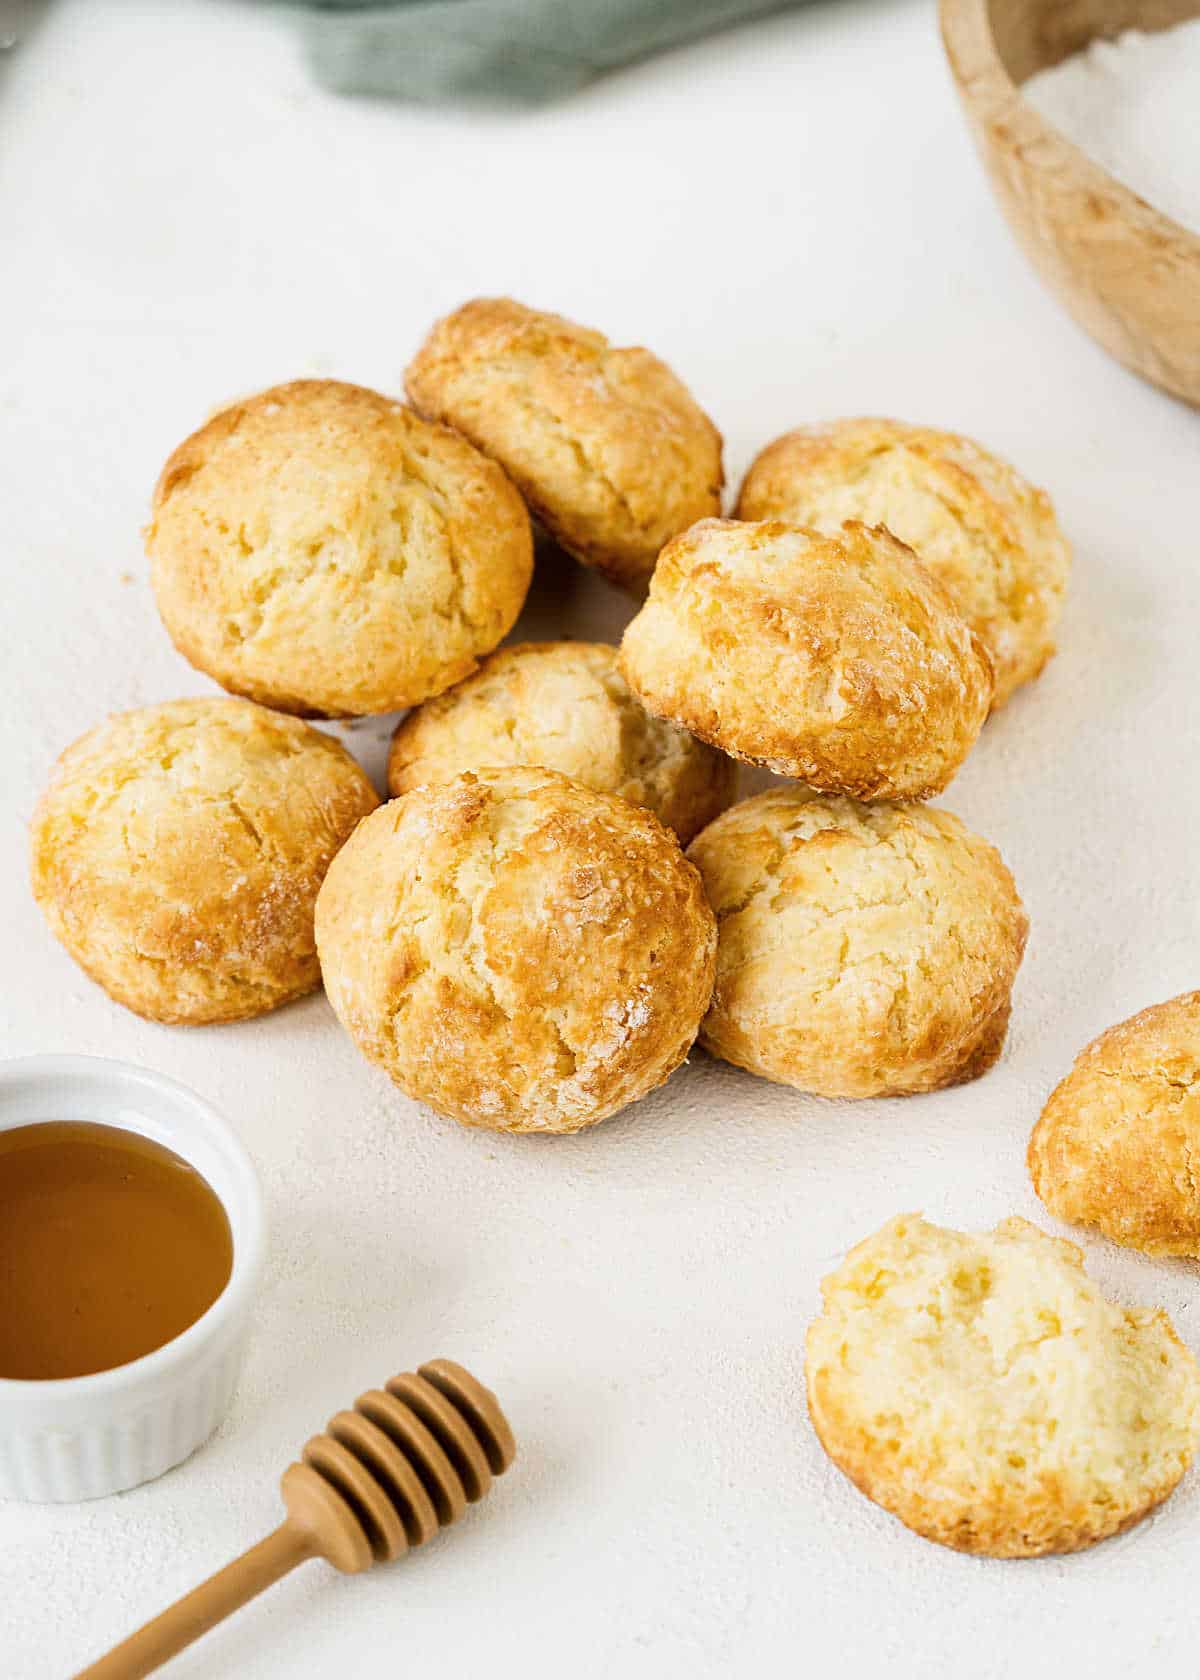 Scones piled up on a white surface with a honey pot.